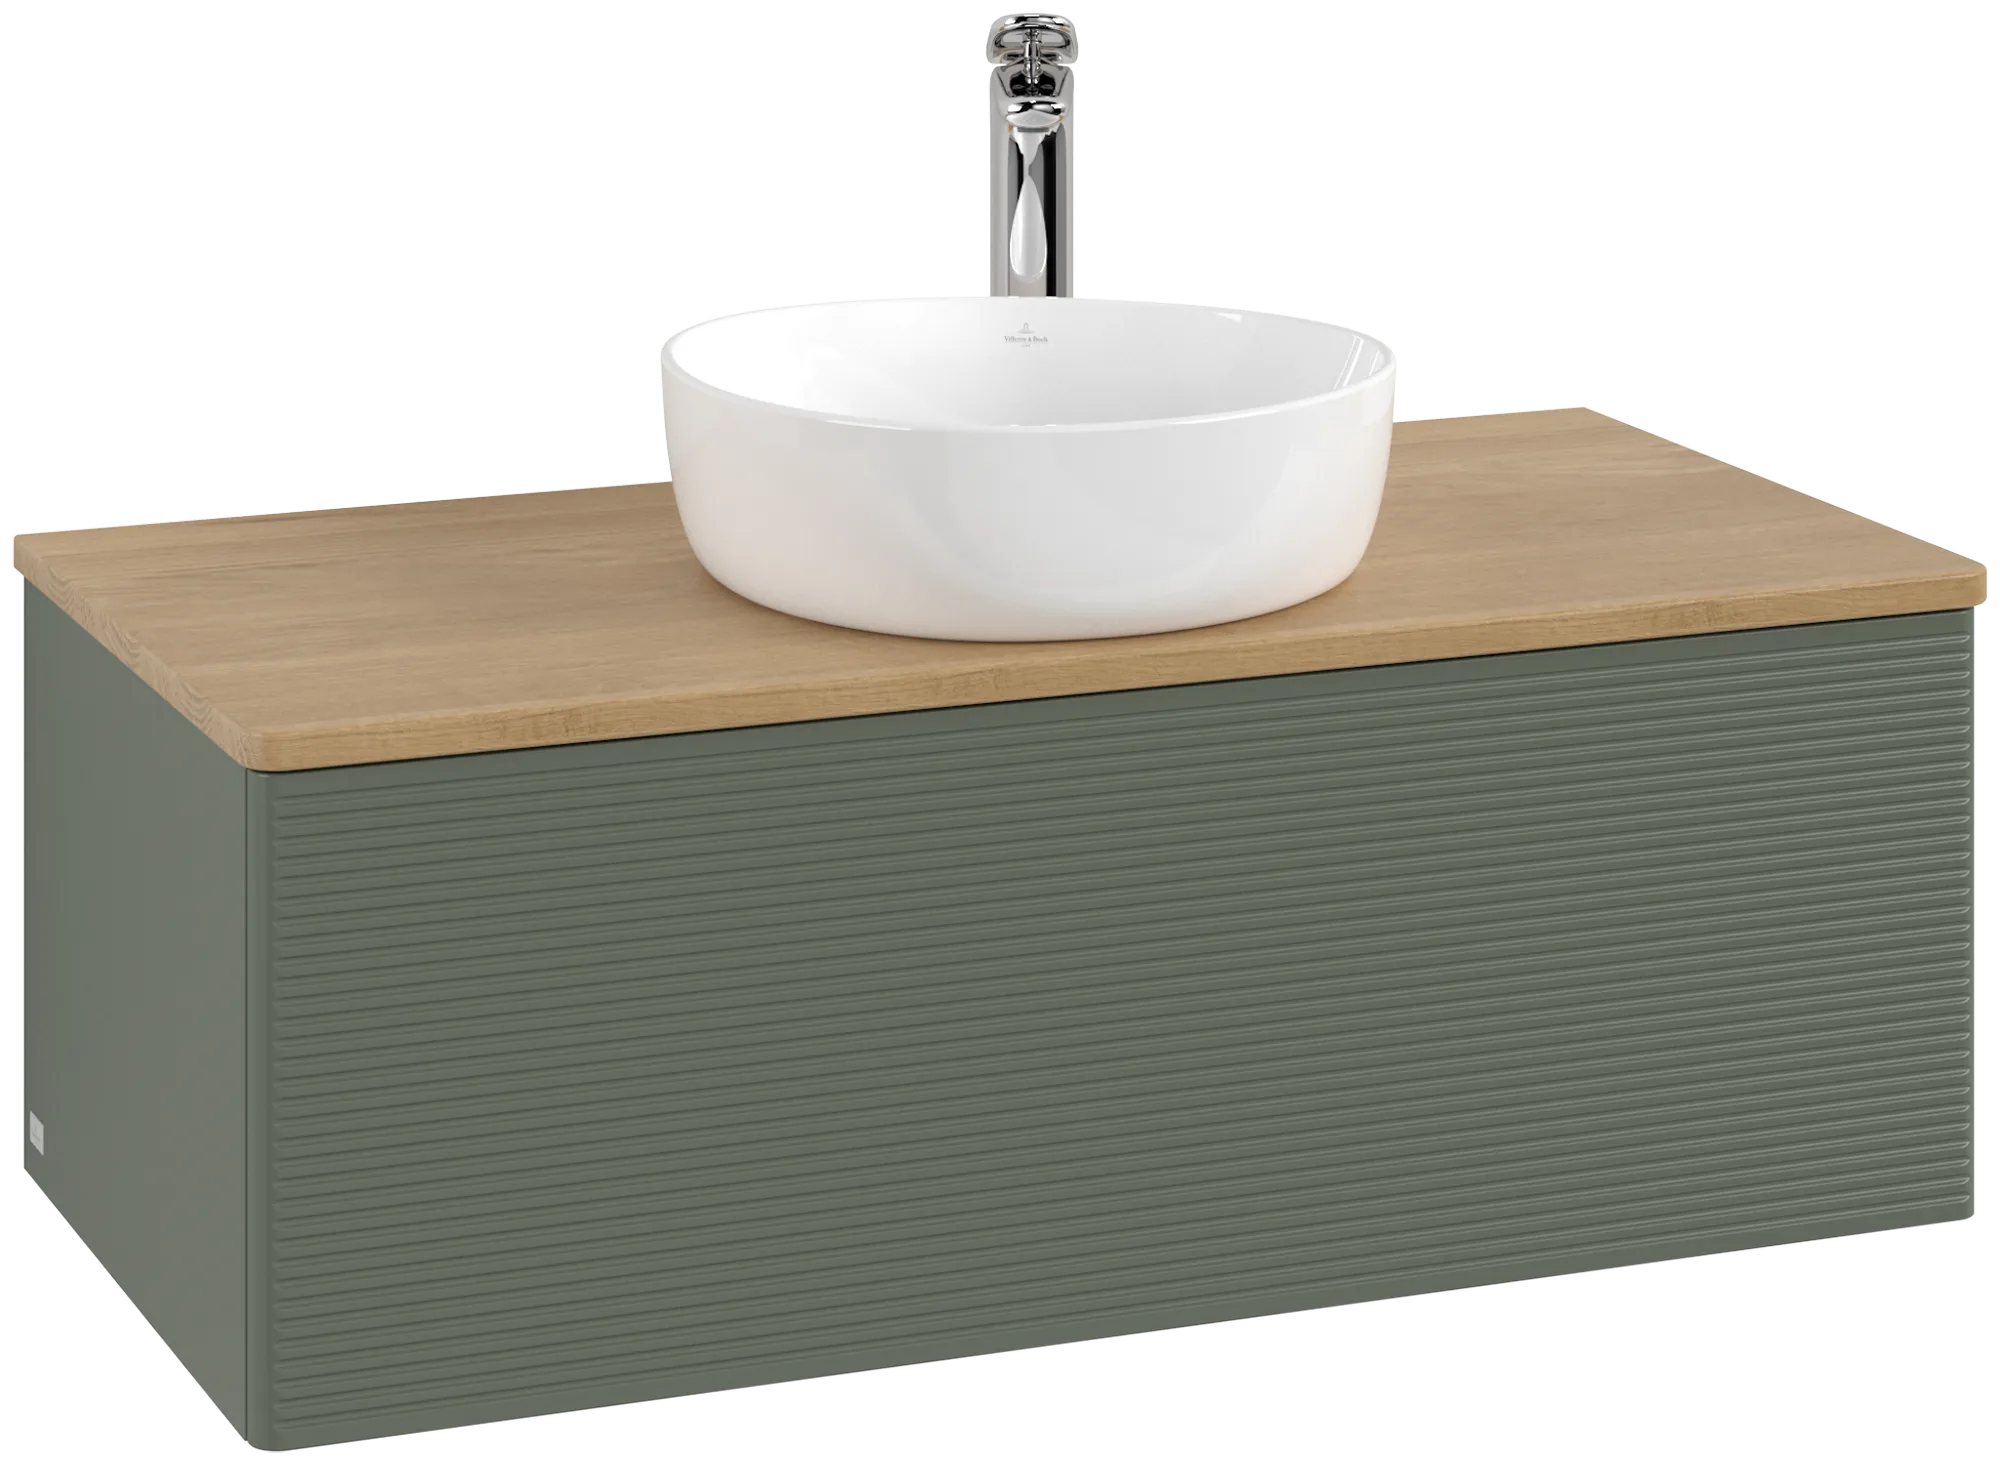 Picture of VILLEROY BOCH Antao Vanity unit, with lighting, 1 pull-out compartment, 1000 x 360 x 500 mm, Front with grain texture, Leaf Green Matt Lacquer / Honey Oak #L31151HL